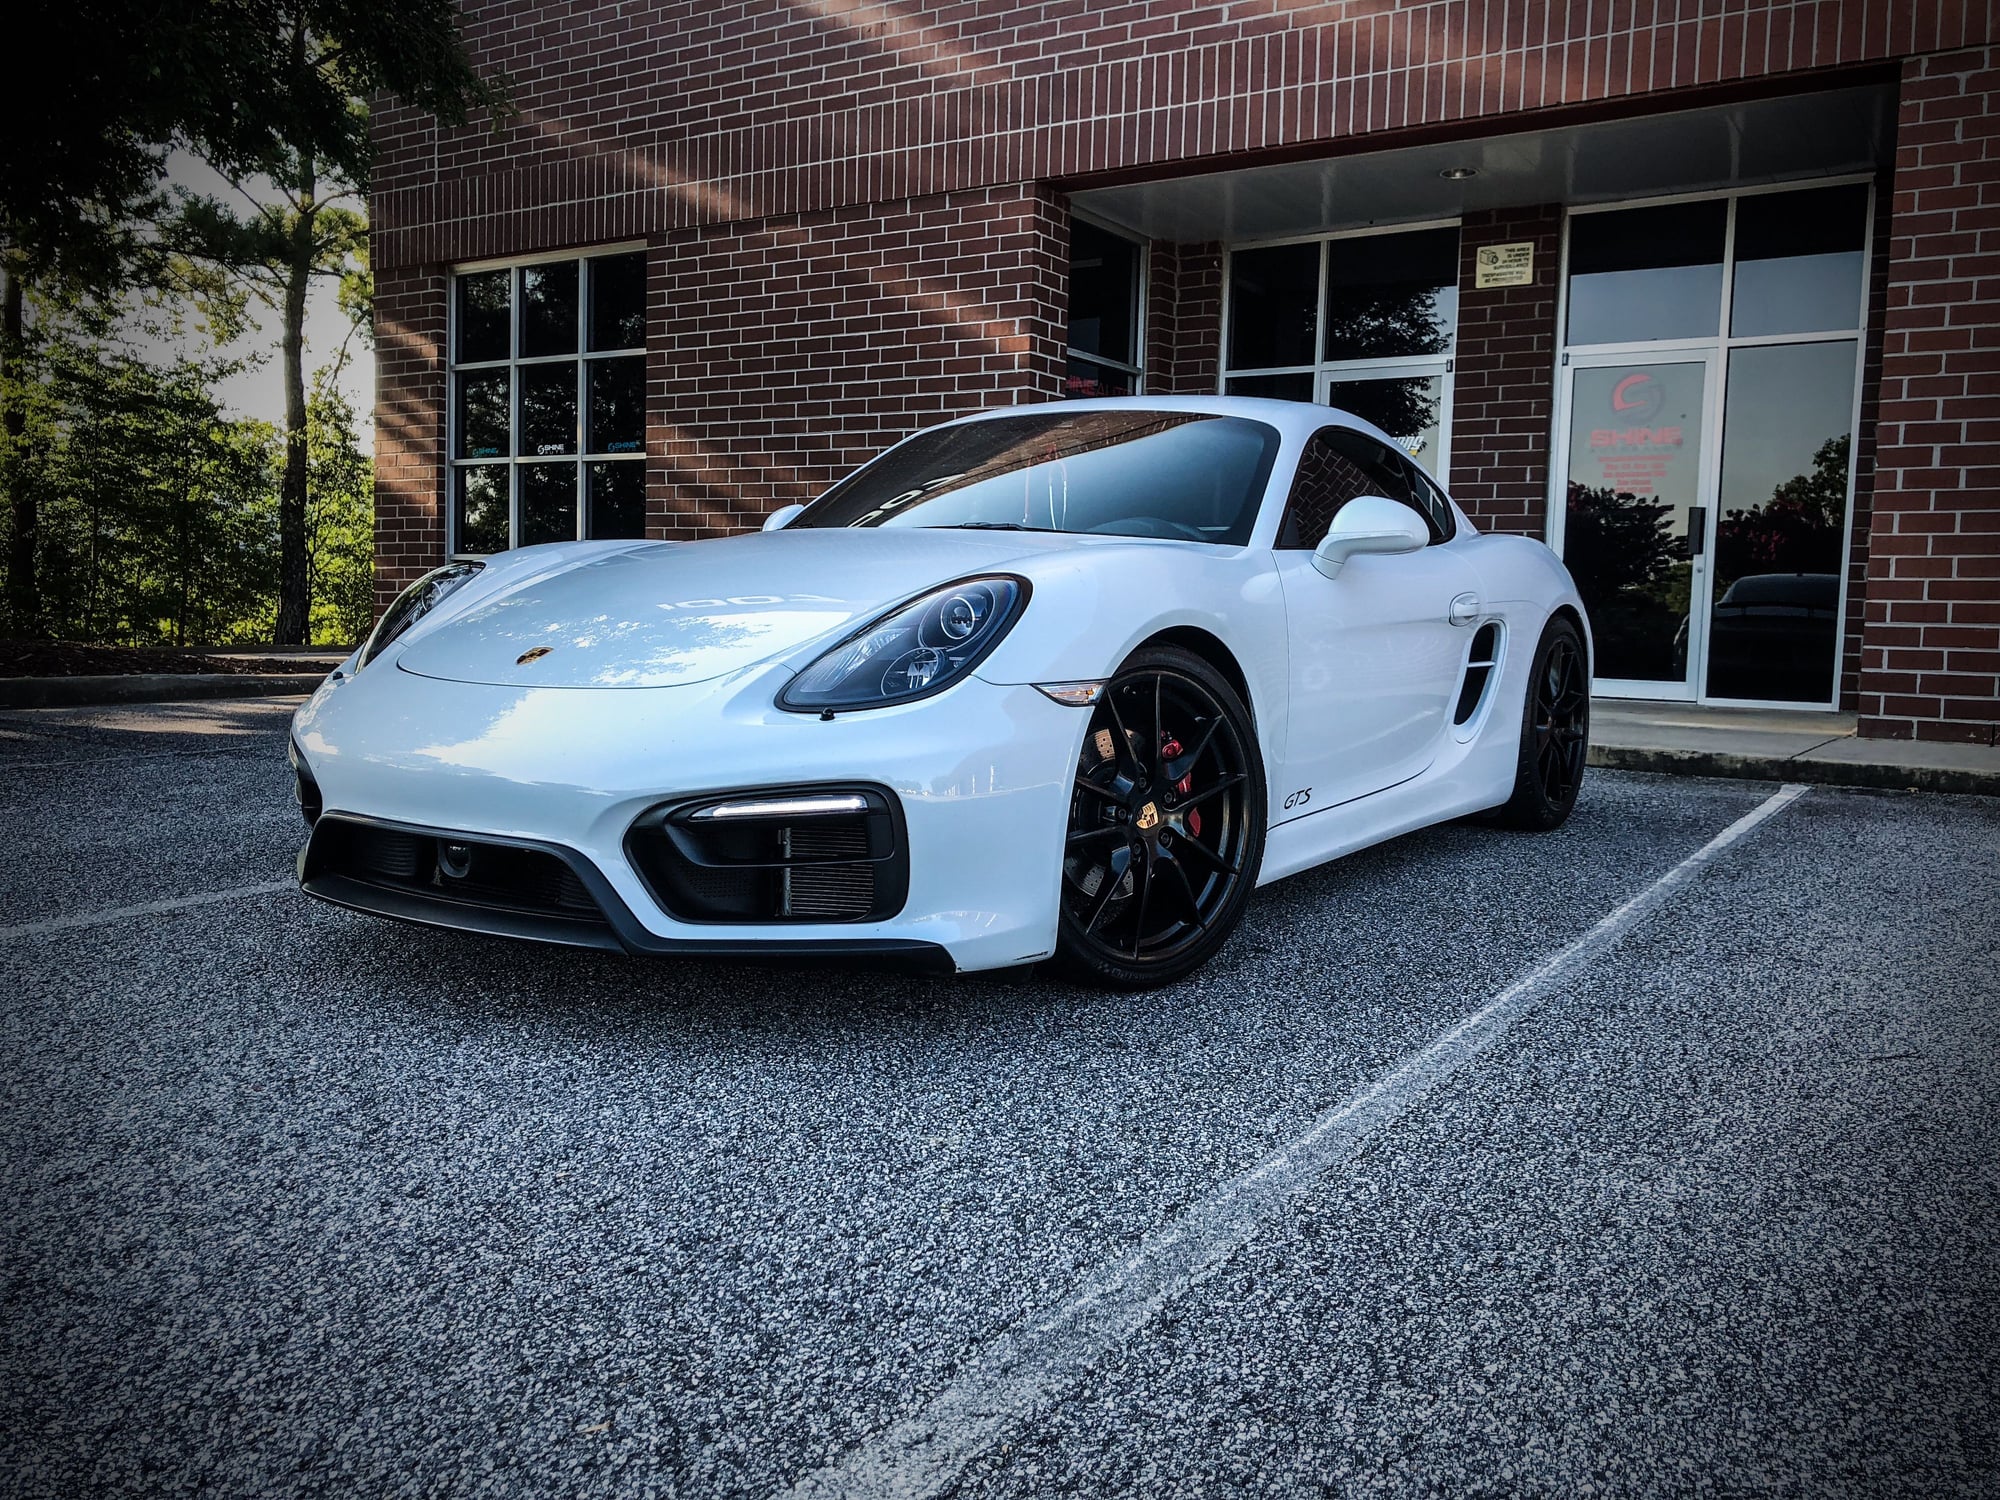 2015 Porsche Cayman - CPO Cayman GTS!!! - Used - VIN WP0AB2A86FK180452 - 25,000 Miles - 6 cyl - 2WD - Automatic - Coupe - White - Atlanta, GA 30097, United States